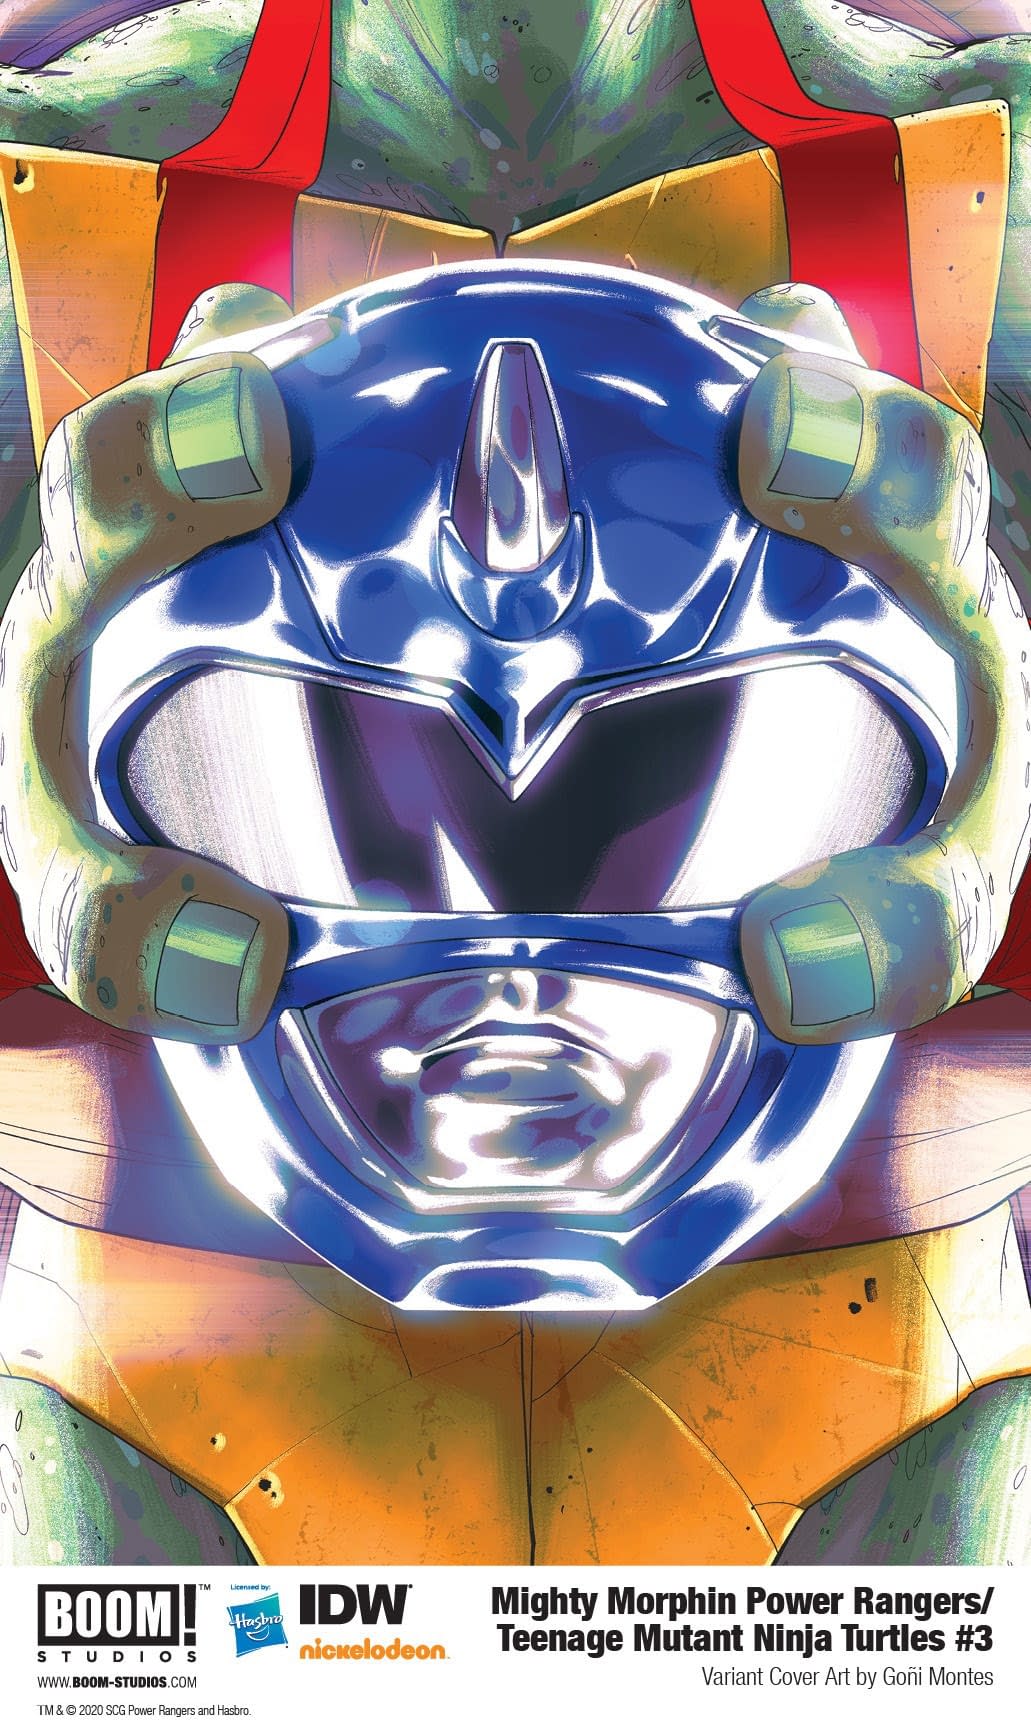 BOOM! Reveals Hot Speculator Tip About Power Rangers/TMNT #3